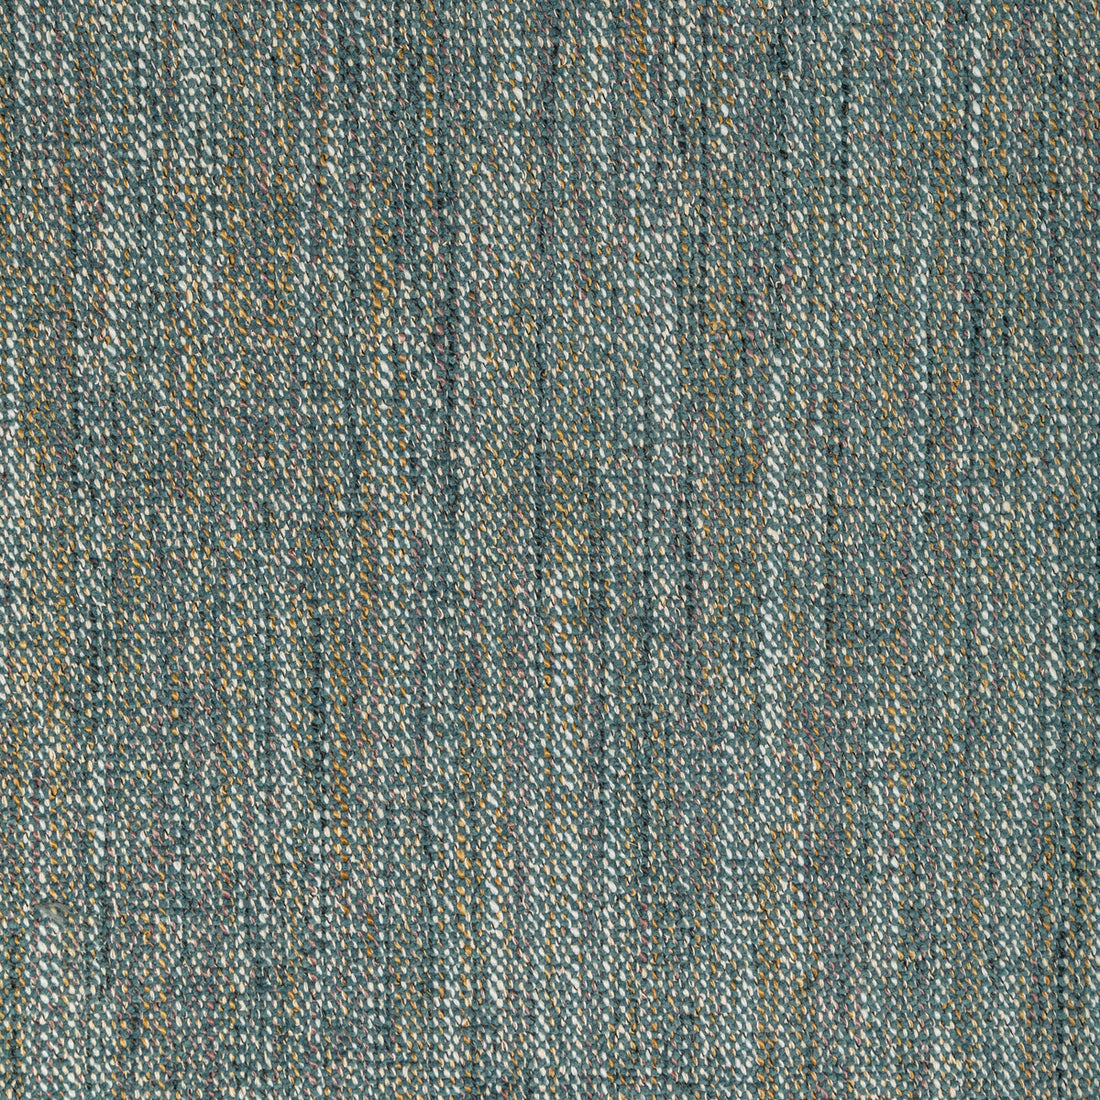 Delfino fabric in chambray color - pattern 36748.5.0 - by Kravet Contract in the Refined Textures Performance Crypton collection